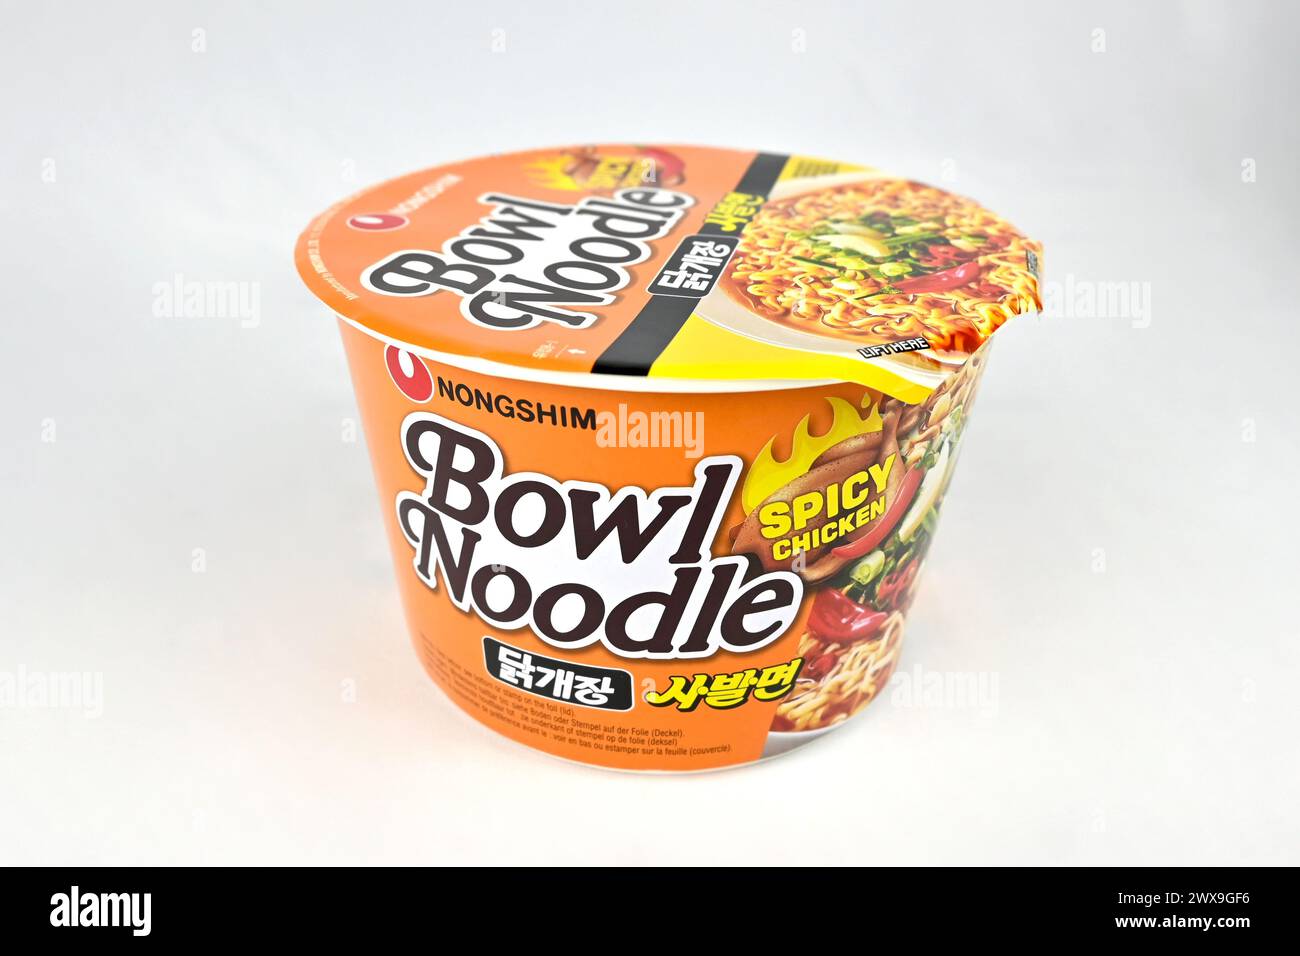 Nongshim Bowl Noodle Spicy Chicken - Wales, UK - 23 March 2024 Stock Photo